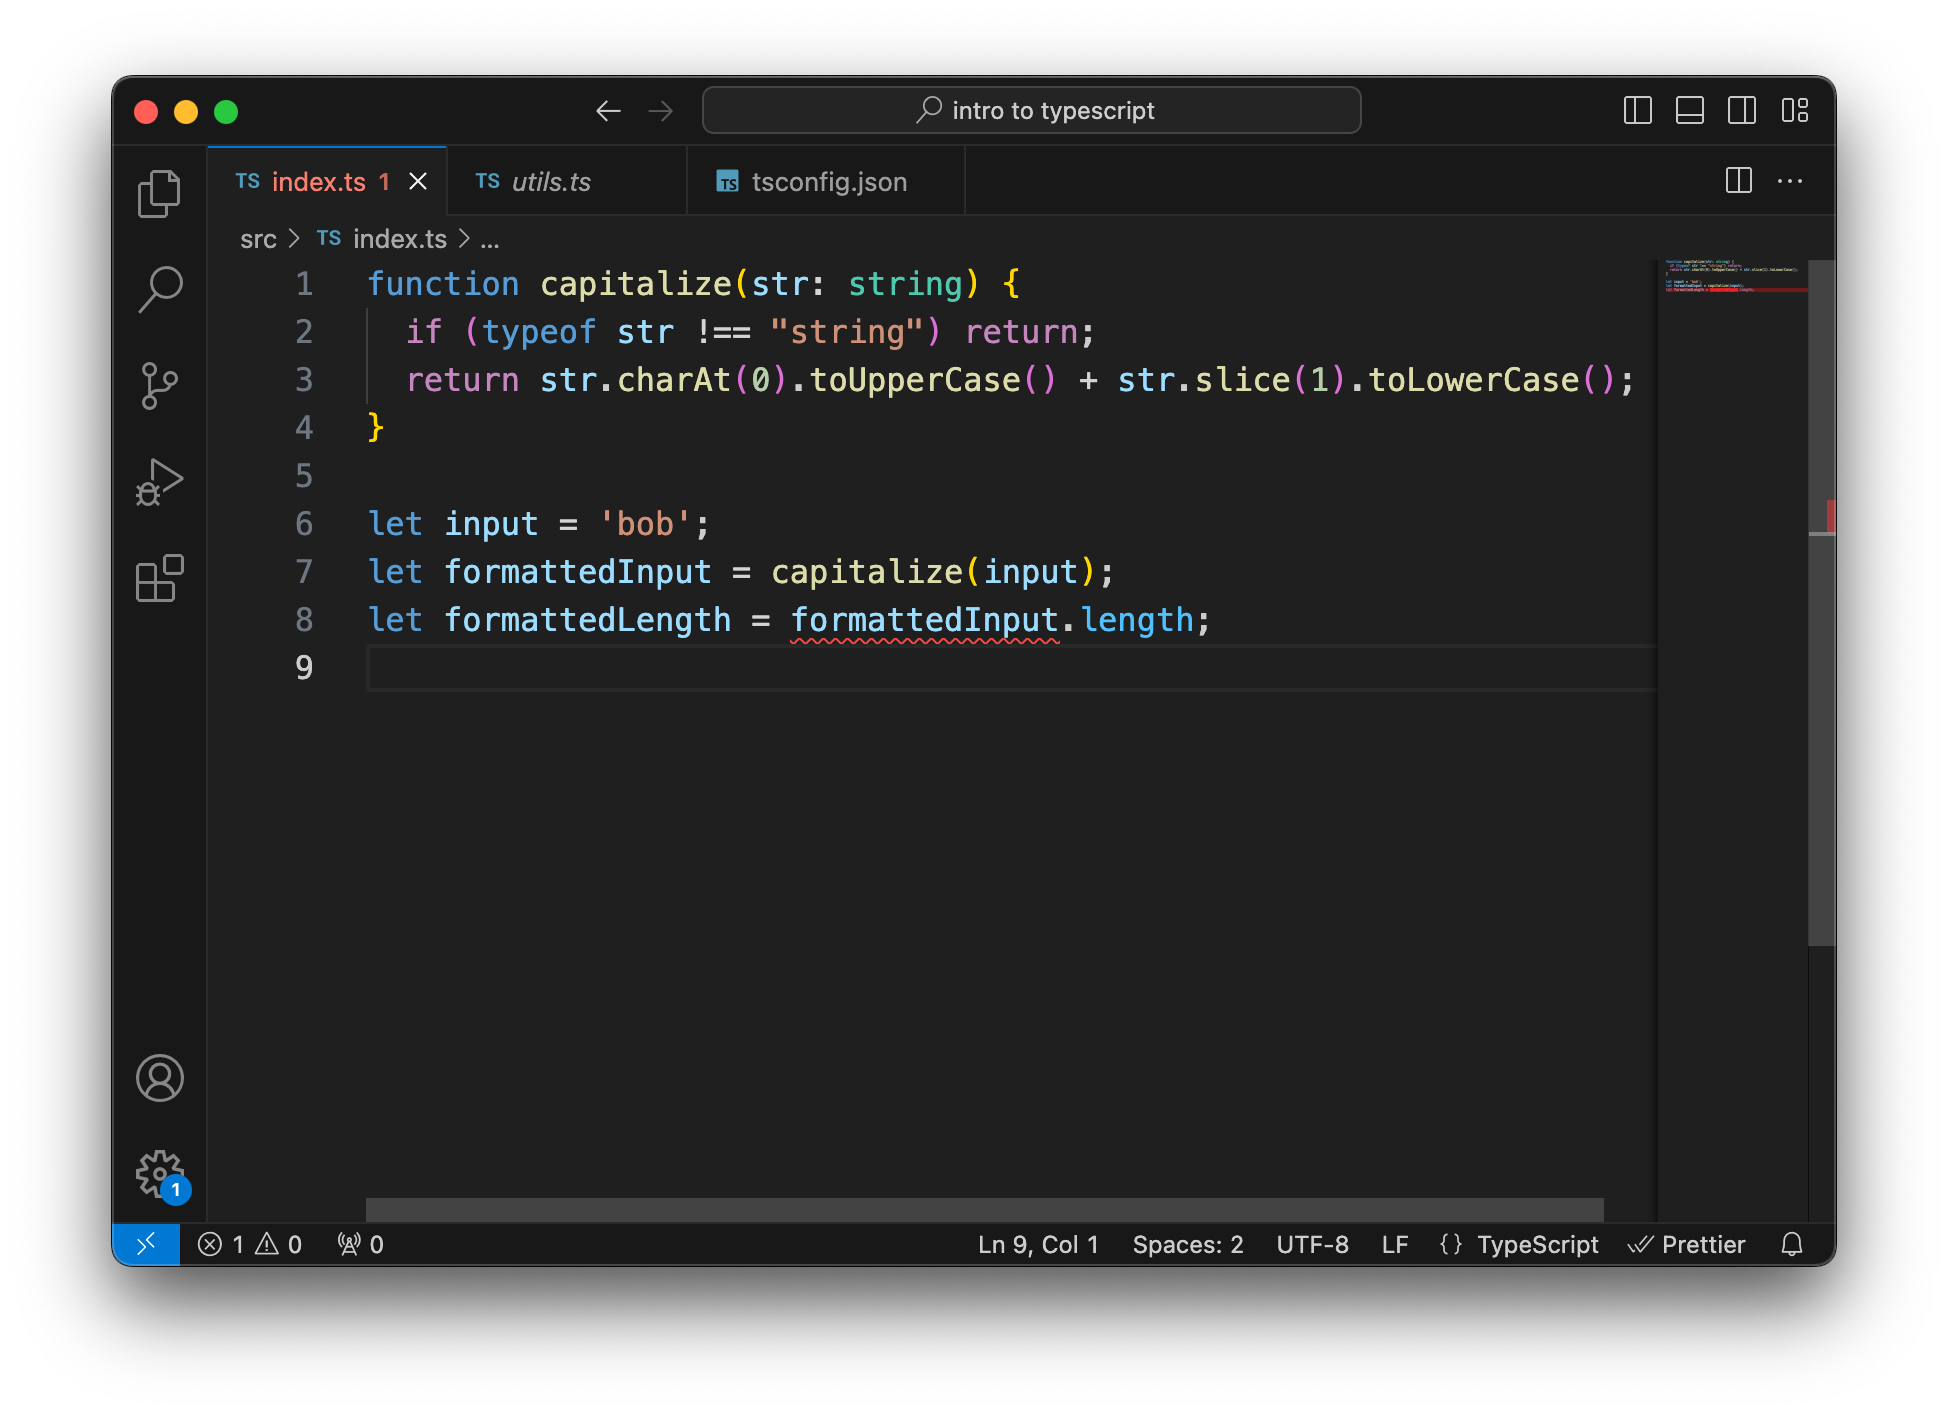 VS Code with the same TypeScript file as before. Except we set the type of the function argument to string.